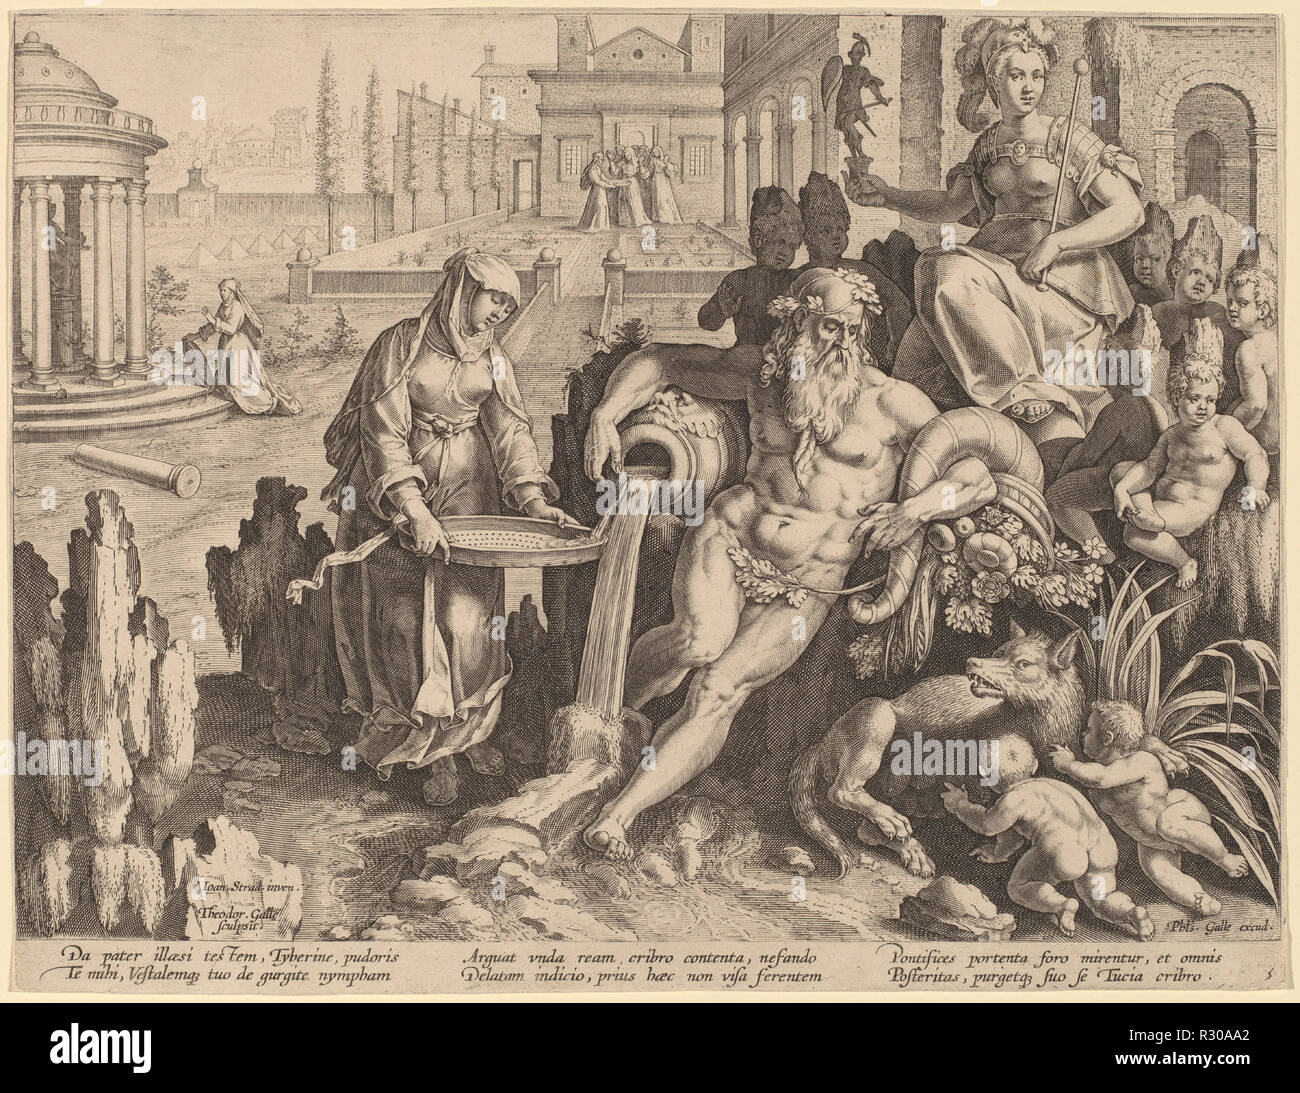 The River God Tiber with the Urn and the Vestal Tuccia. Dimensions: plate: 21.8 x 28.2 cm (8 9/16 x 11 1/8 in.). Medium: engraving on laid paper. Museum: National Gallery of Art, Washington DC. Author: Theodor Galle after Jan van der Straet. Stock Photo